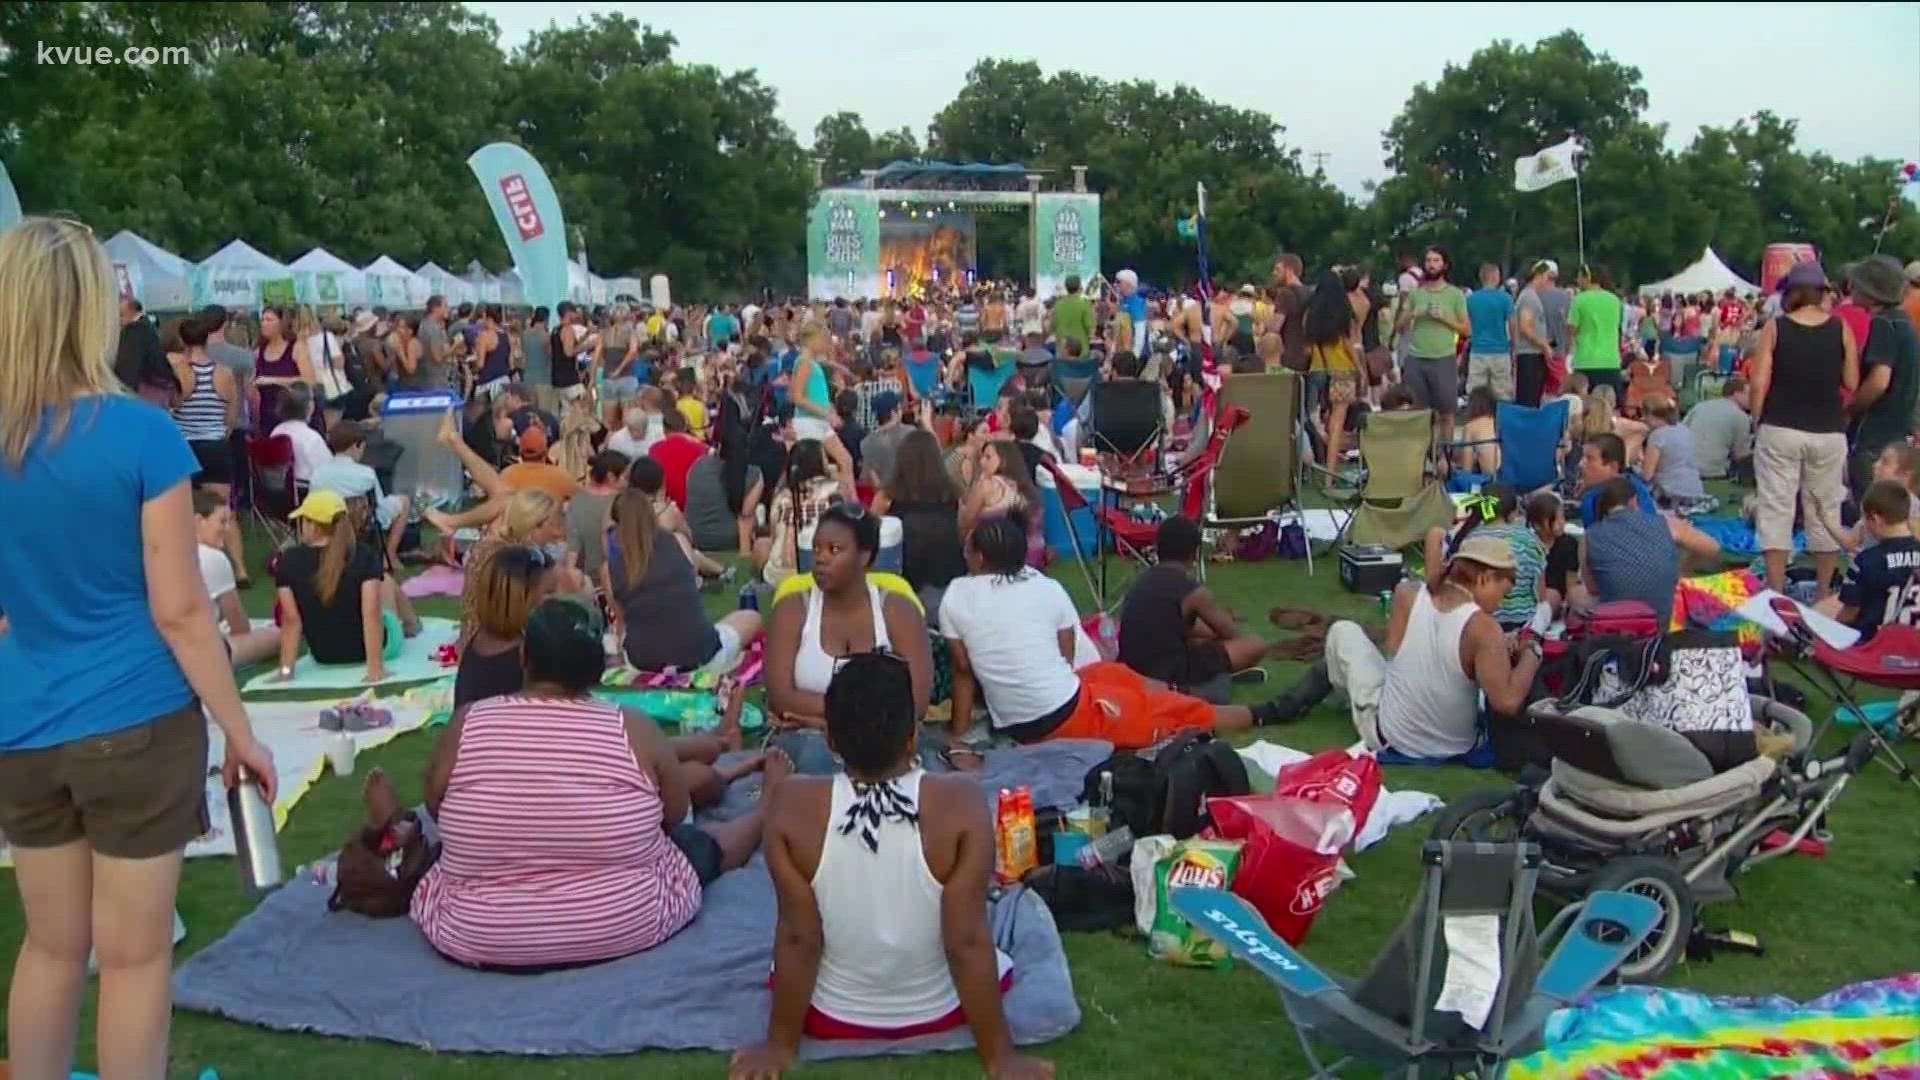 The concerts were set for Tuesday and Wednesday in Zilker Park.